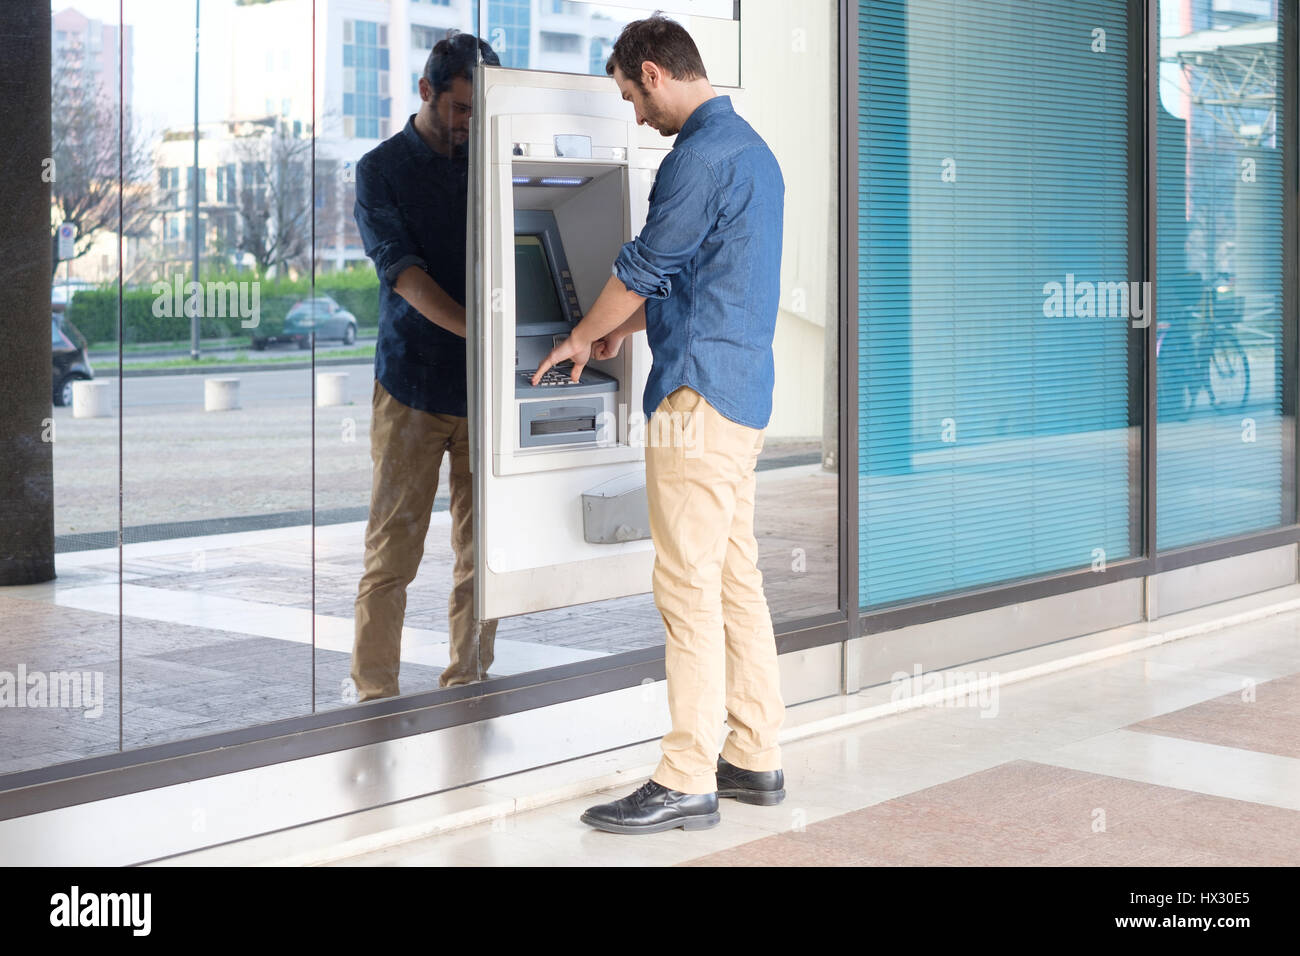 Man using his credit card in an atm for cash withdrawal Stock Photo